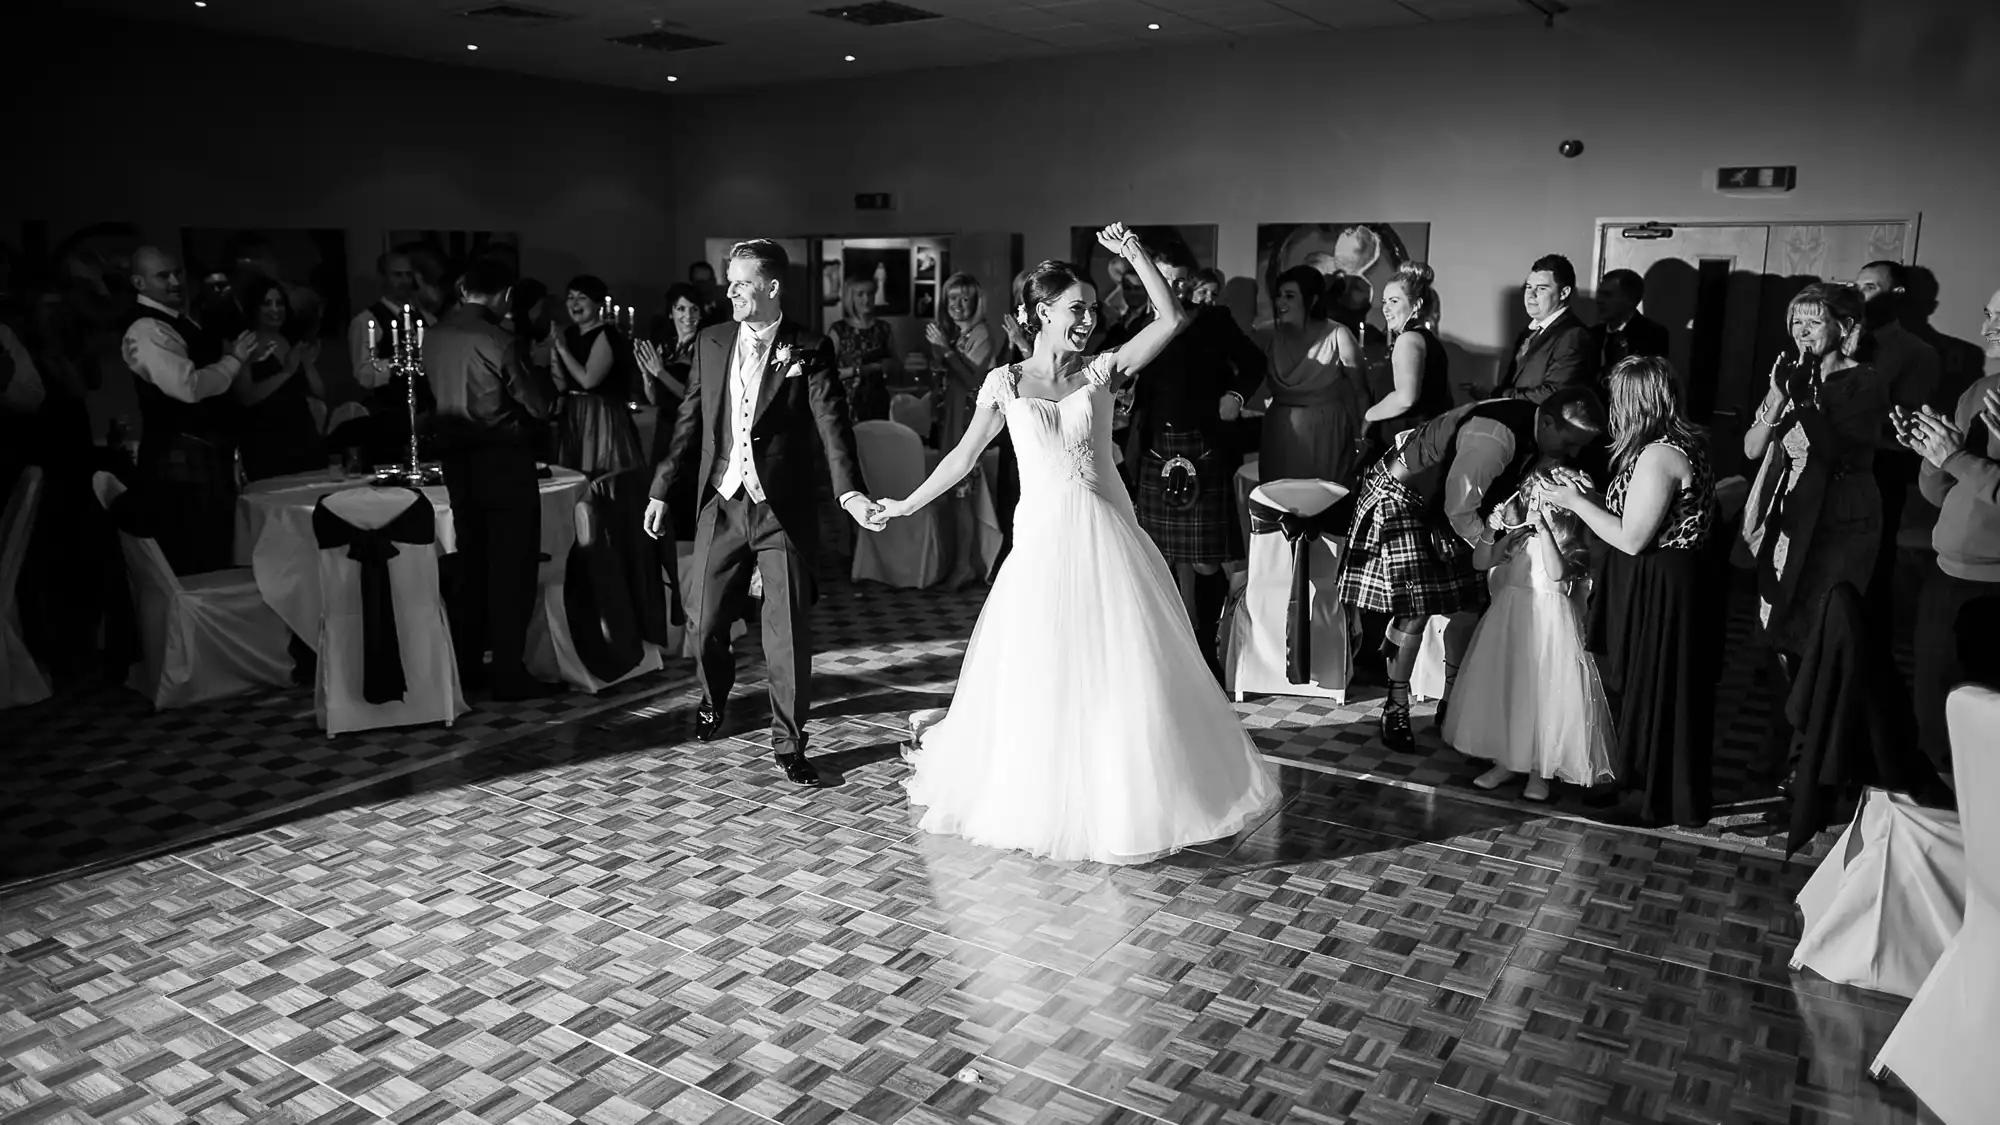 A bride and groom joyously perform their first dance in a ballroom surrounded by applauding guests, capturing a moment of celebration in black and white.